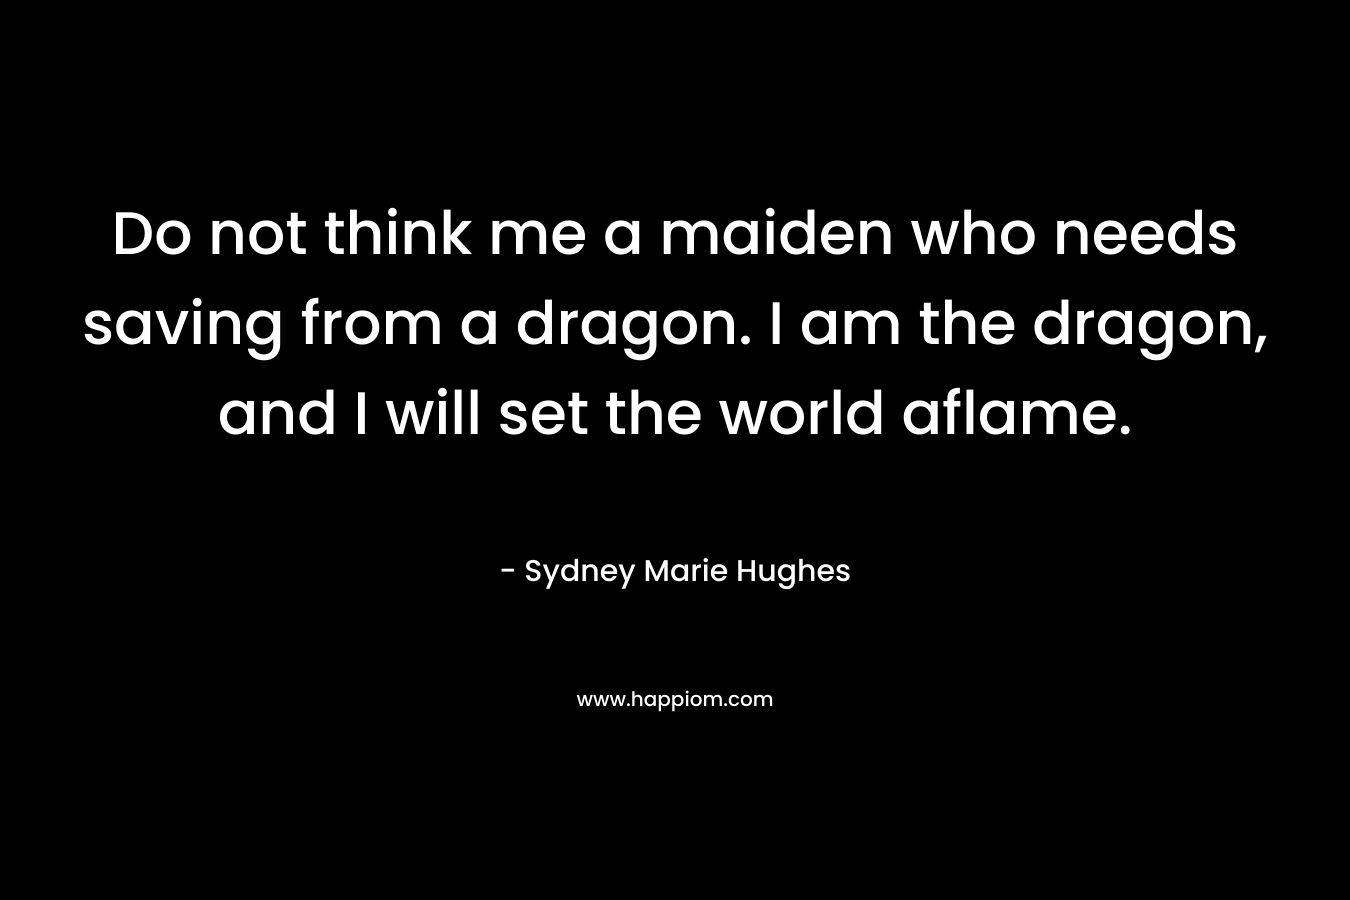 Do not think me a maiden who needs saving from a dragon. I am the dragon, and I will set the world aflame.